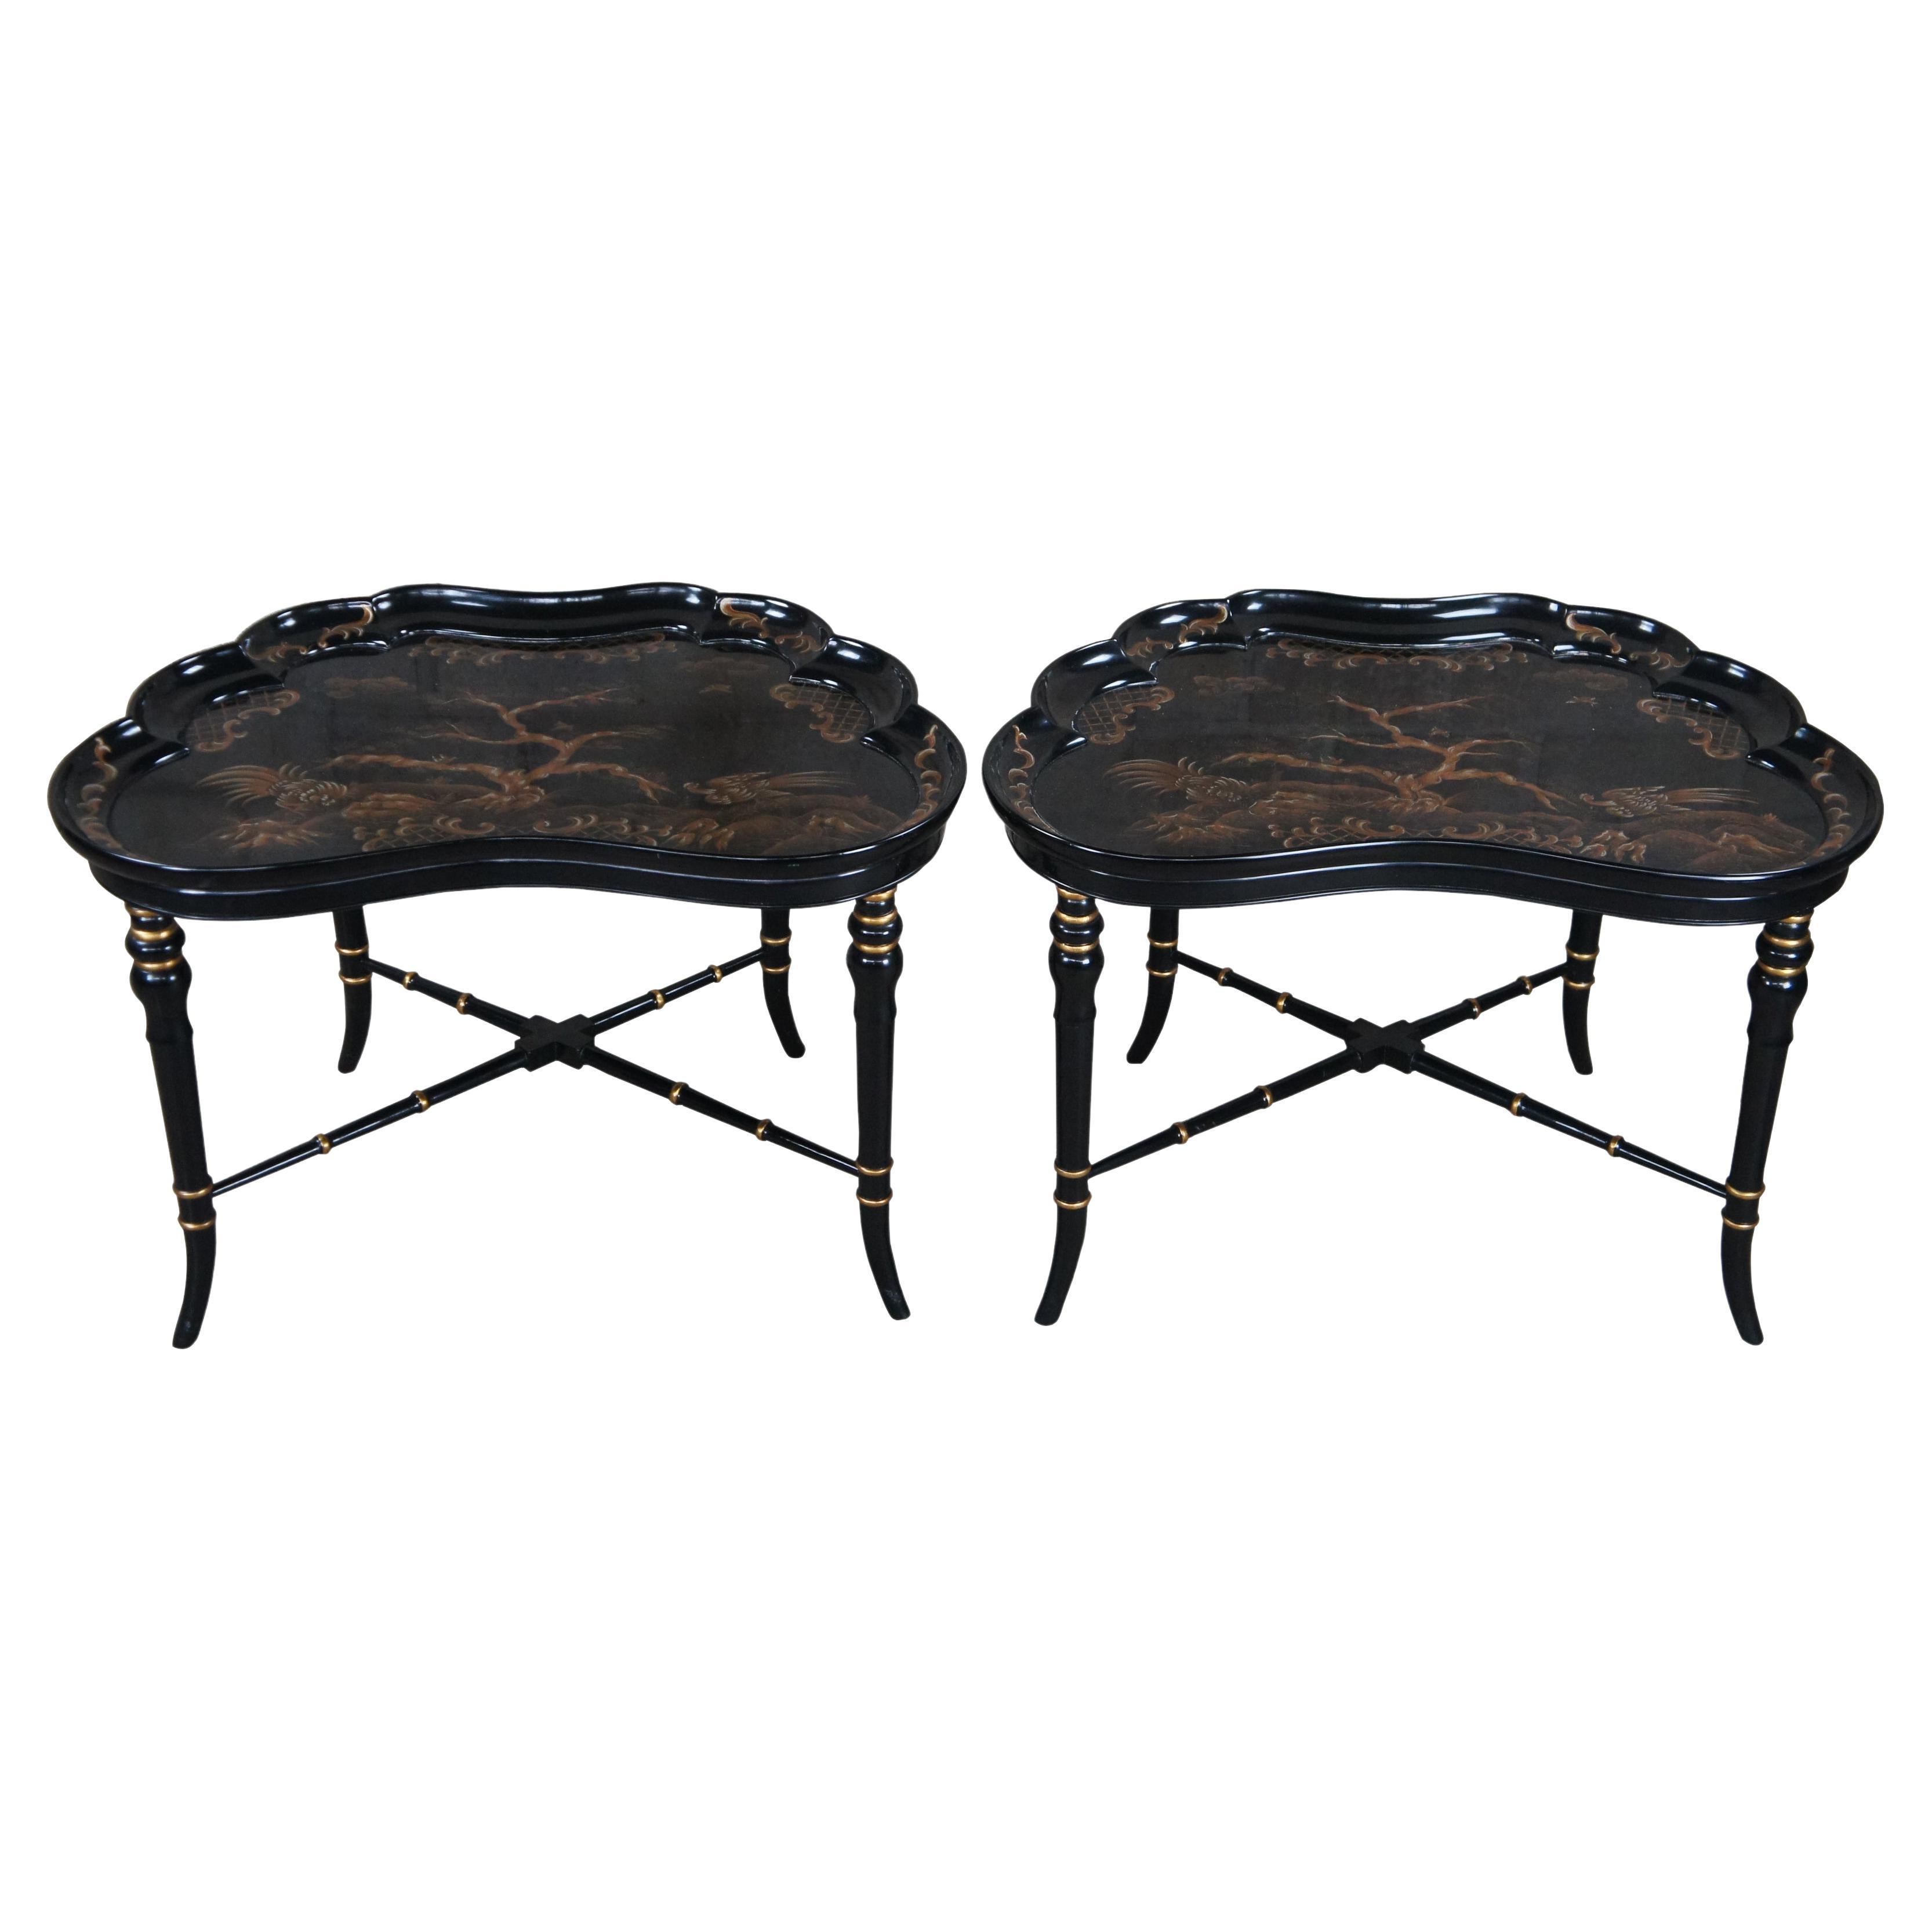 2 Vintage Karges Black lacquer Regency Chinoiserie Butterfly Tea Tray Tables 30"